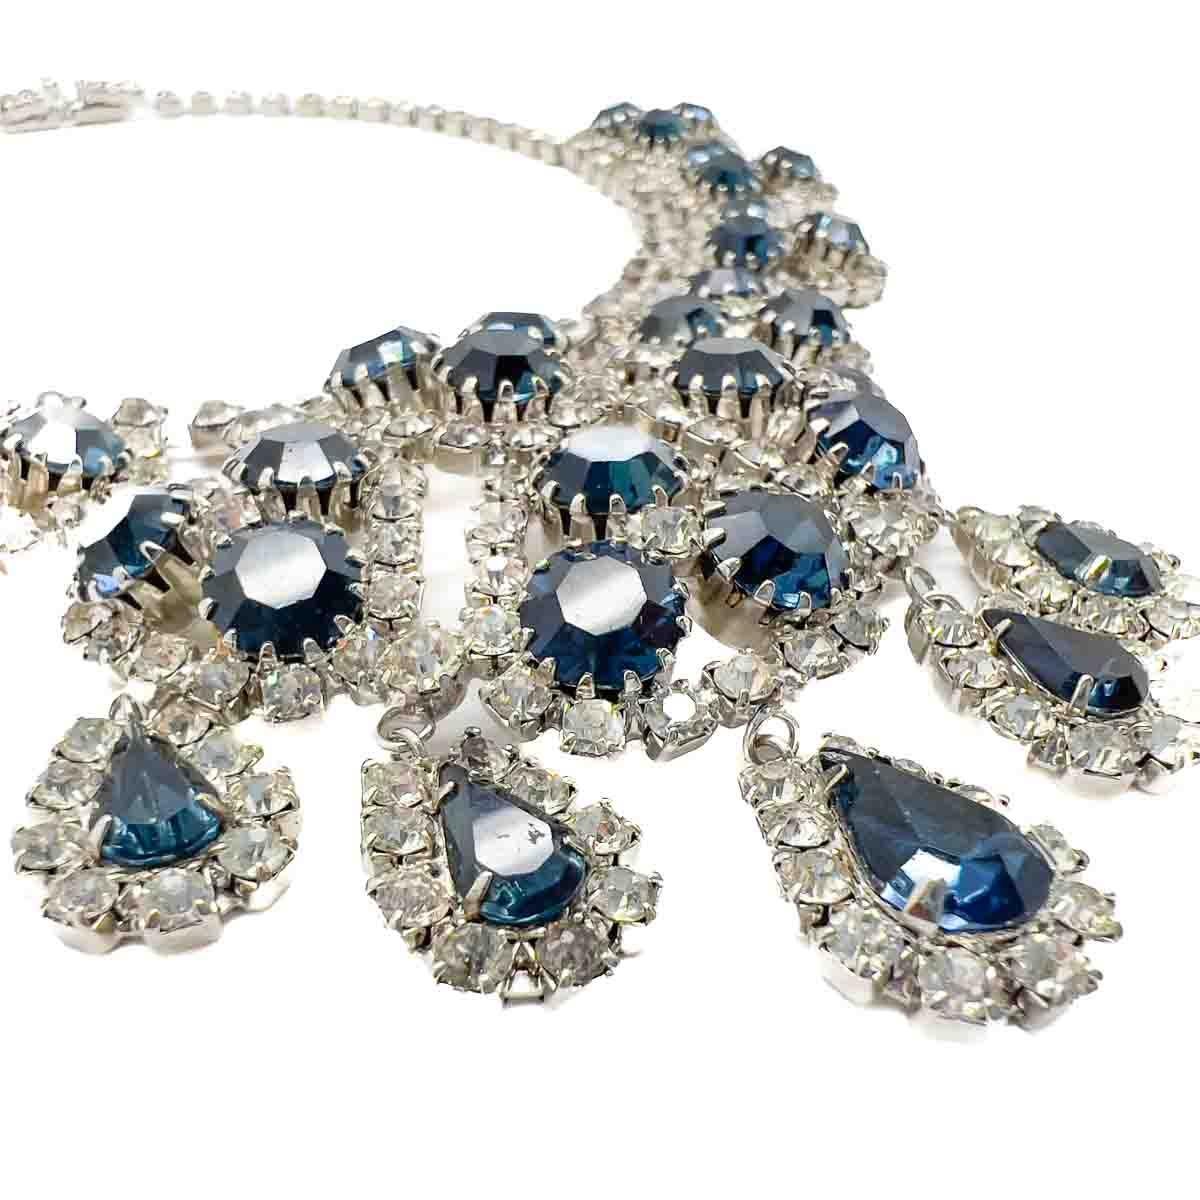 A Vintage 'Eisenberg Ice' Sapphire Necklace. A spectacular example of the Ice pieces, so called as their designs focussed on emulating diamond jewellery. A collar of stones gives way to many droplets culminating in an impressive collar from the